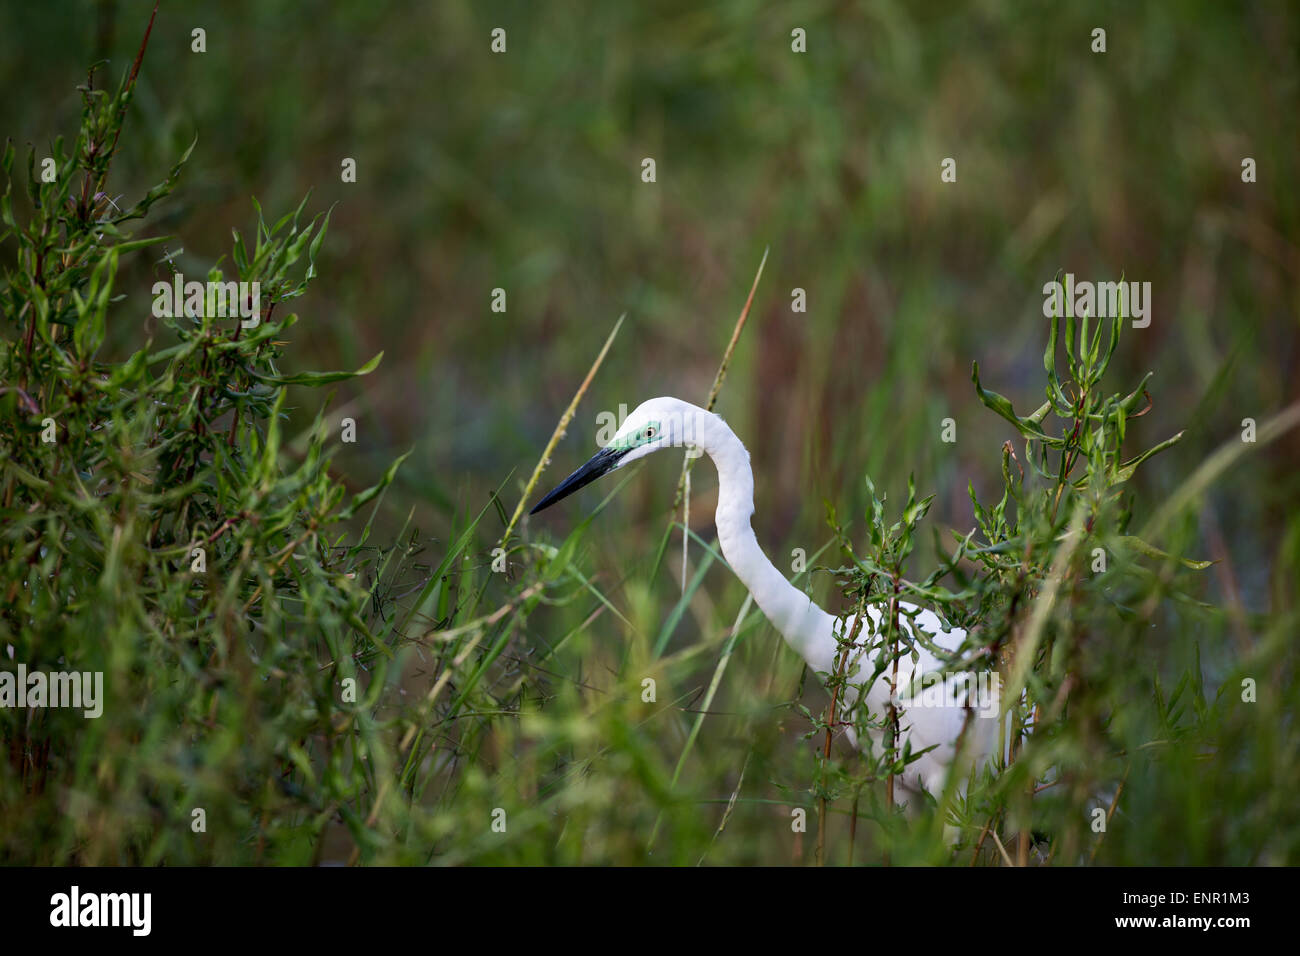 Great Egret in breeding plumage displaying neon green marking on face Stock Photo